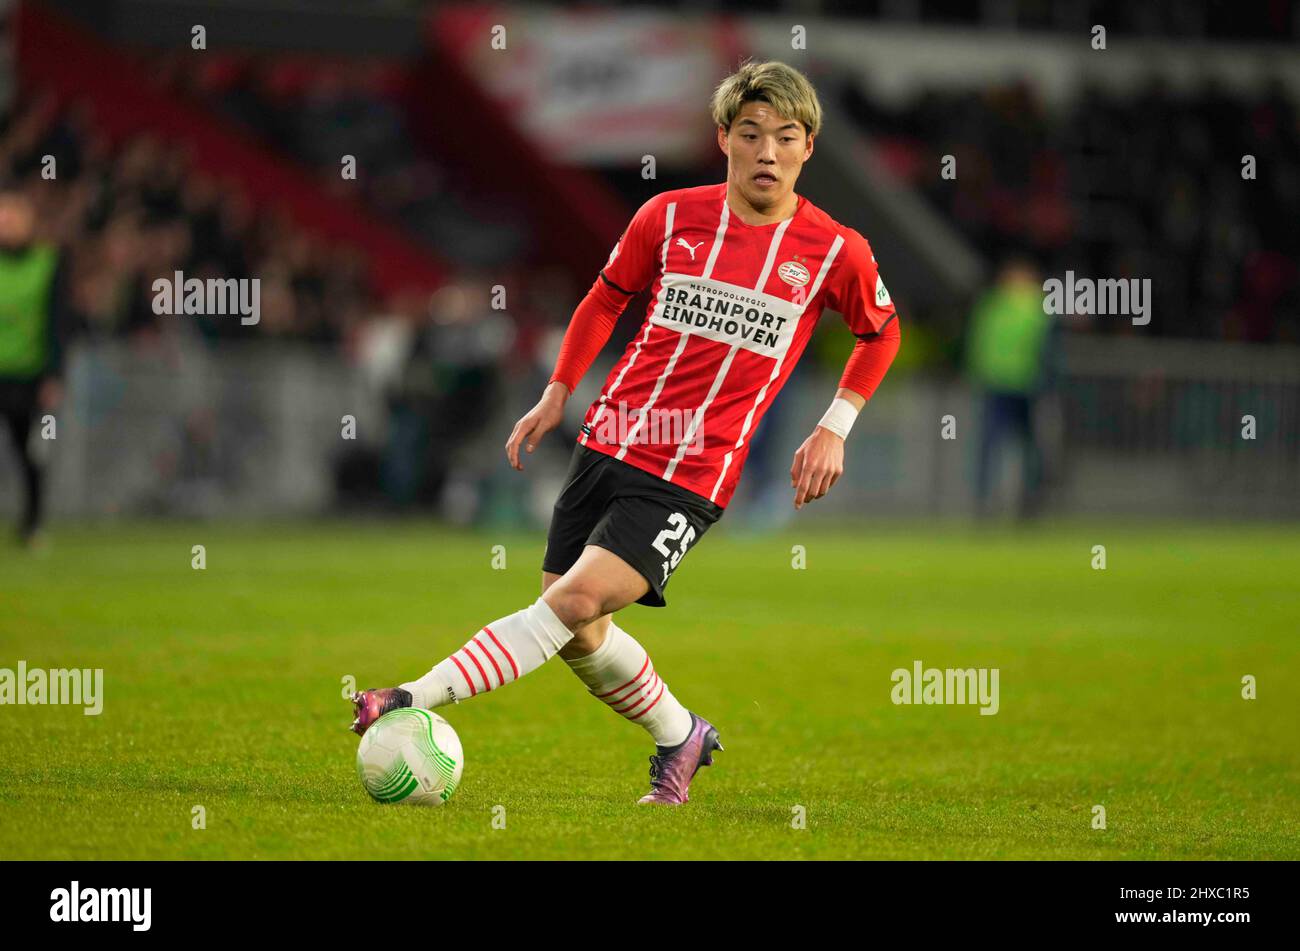 Philips Stadium, Eindhoven, Netherlands. 10th Mar, 2022. Ritsu Doan of PSV Eindhoven controls the ball during PSV Eindhoven v FC KÃ¸benhavn, at Philips Stadium, Eindhoven, Netherlands. Kim Price/CSM/Alamy Live News Stock Photo